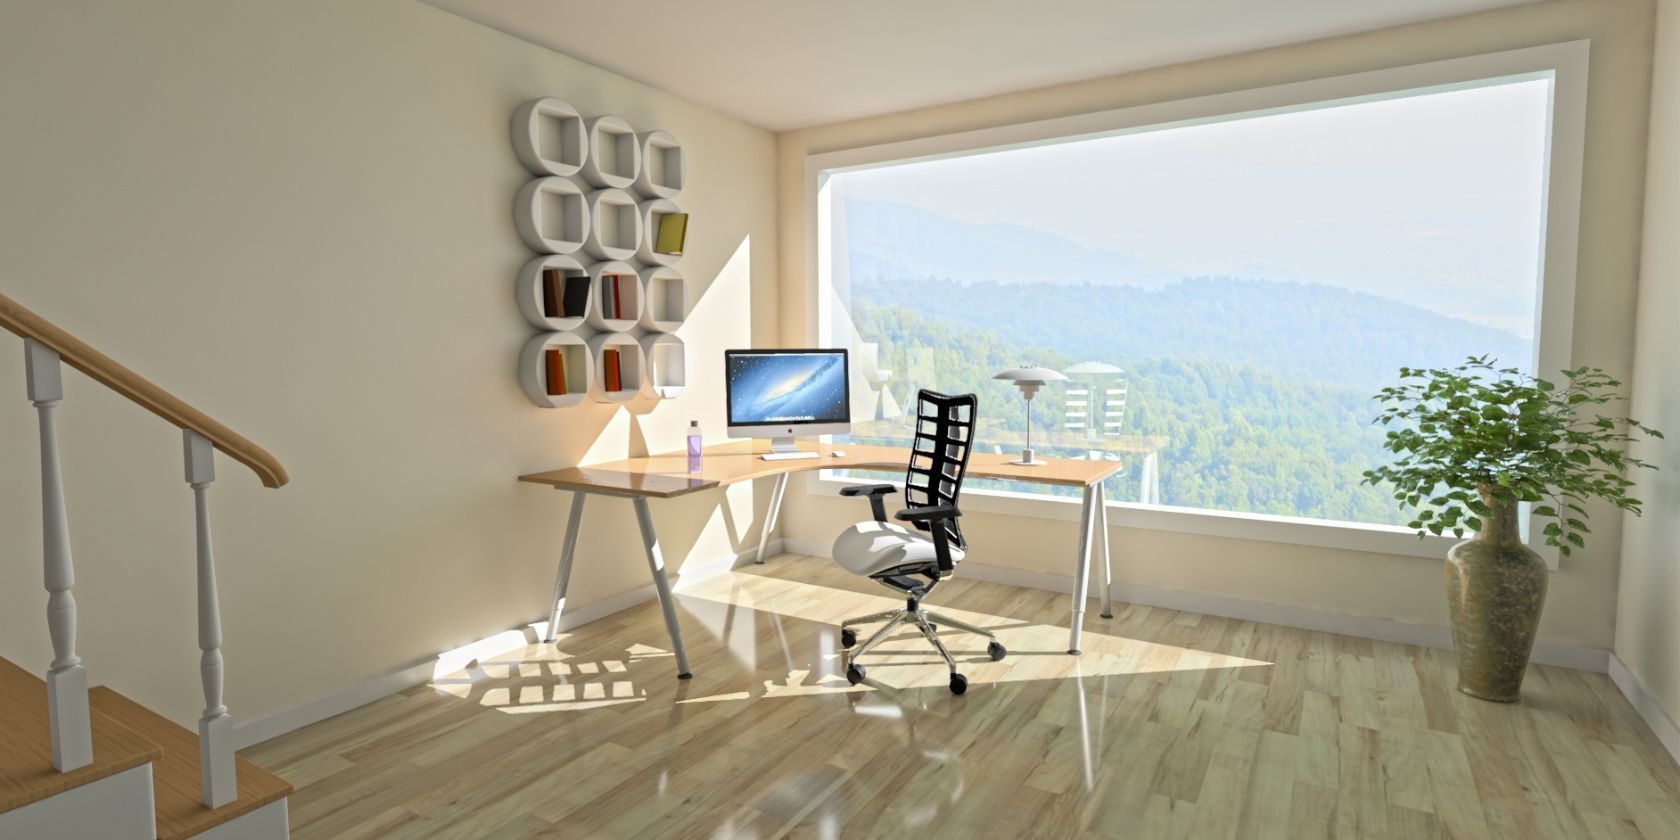 Well-lit home office with L-shaped table, laptop, wooden floors, and ergonomic chair